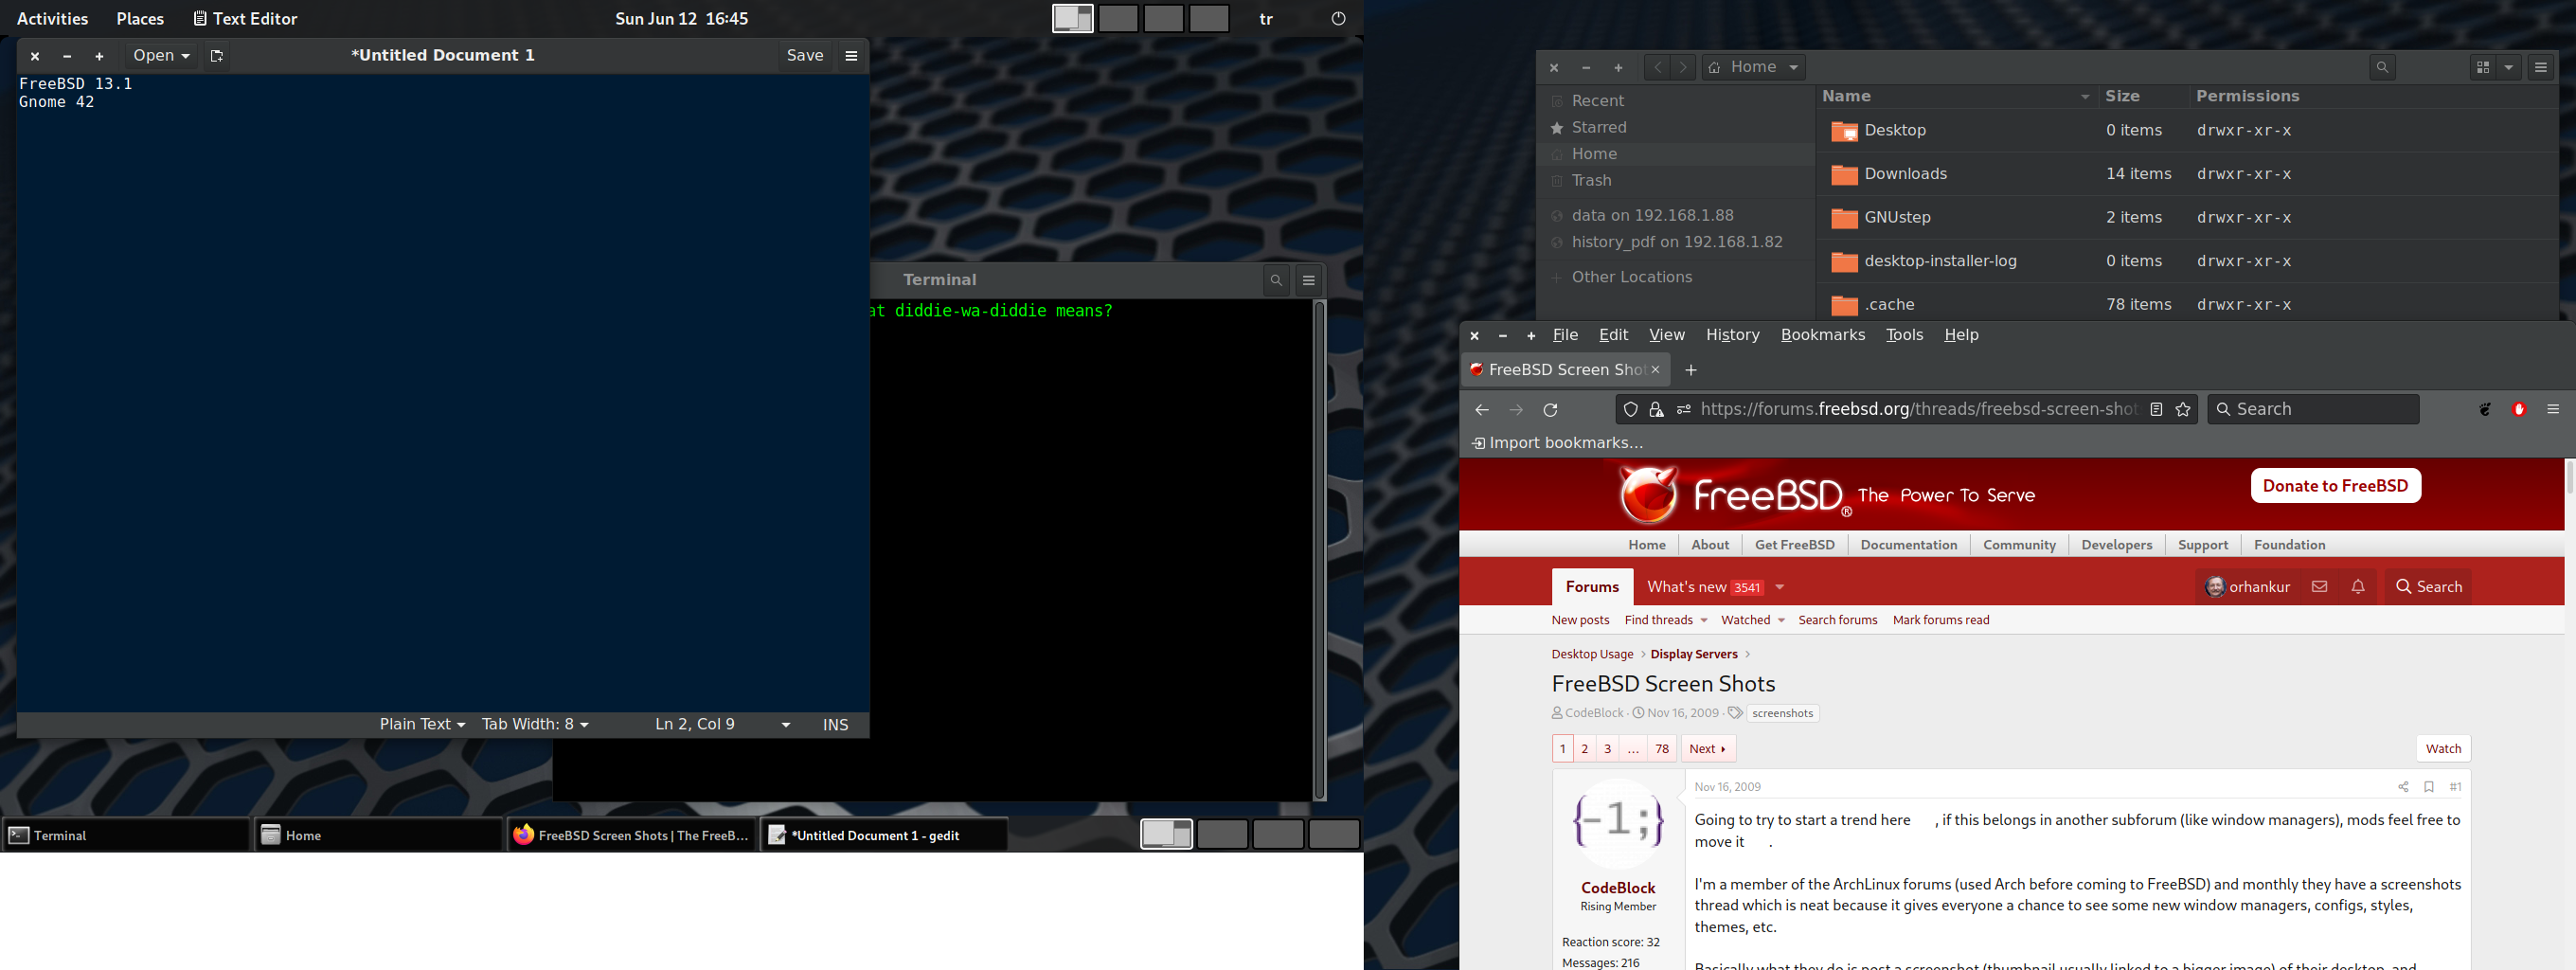 FreeBSD 13.1 running Gnome 42 by orhankur